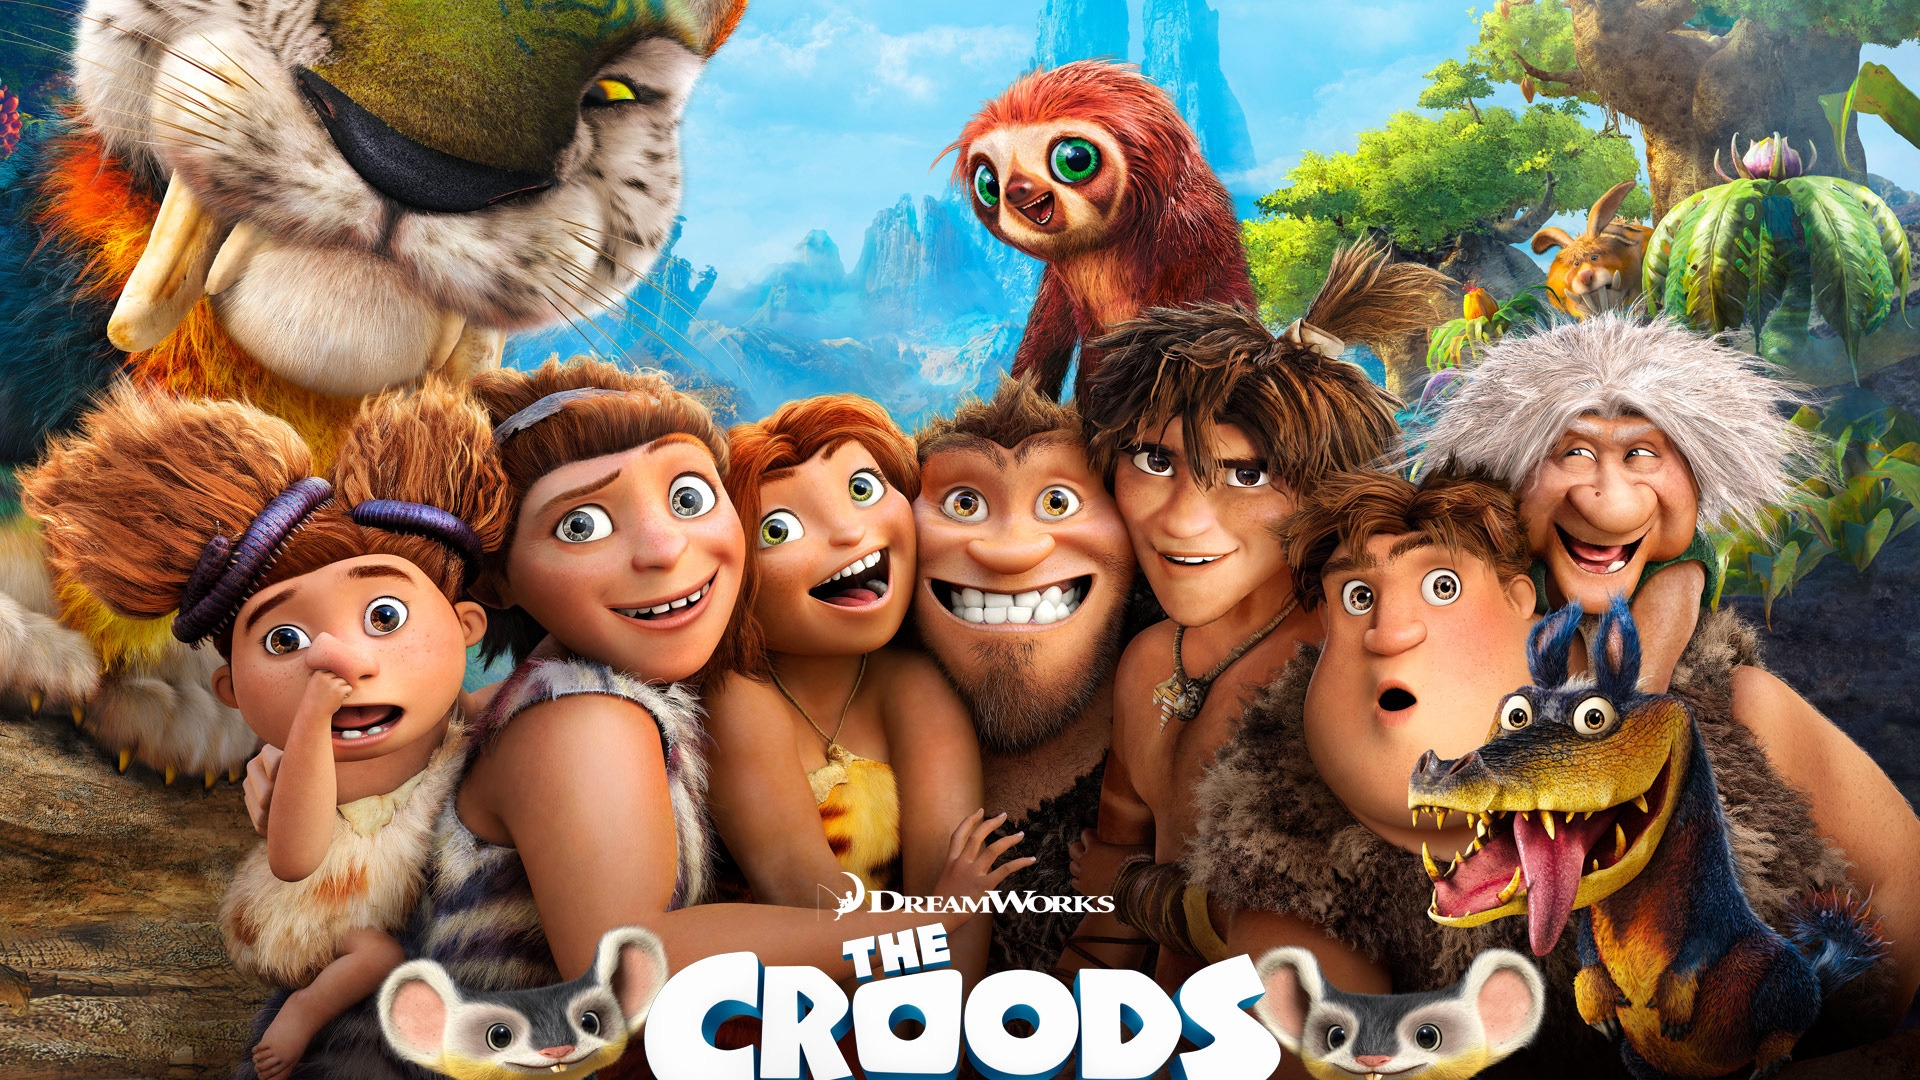 The Croods for 1920 x 1080 HDTV 1080p resolution